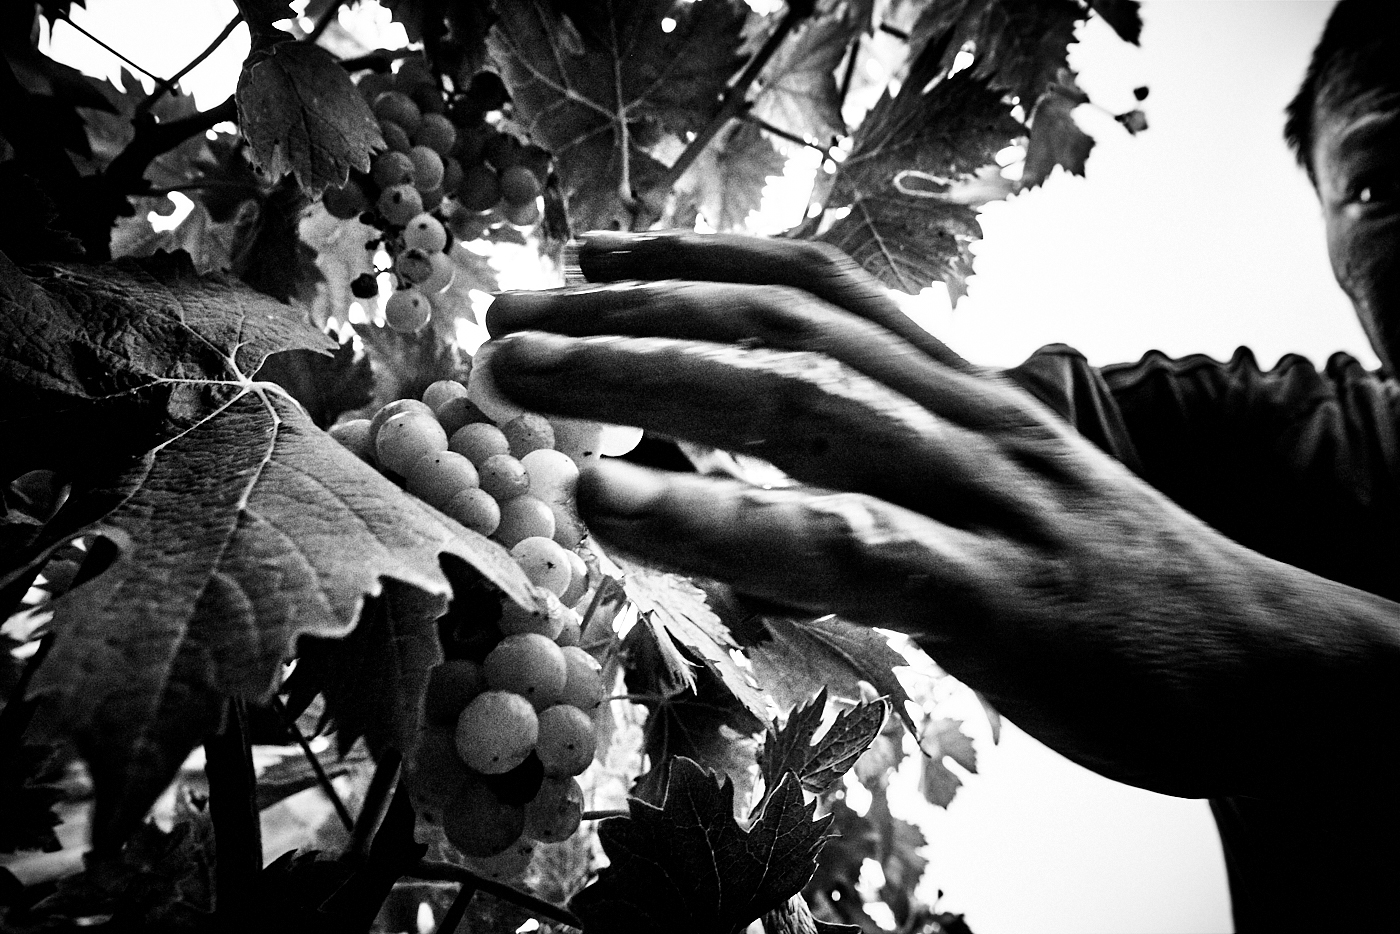 Alessandro Puccinelli's Photographic Celebration of The Harvest